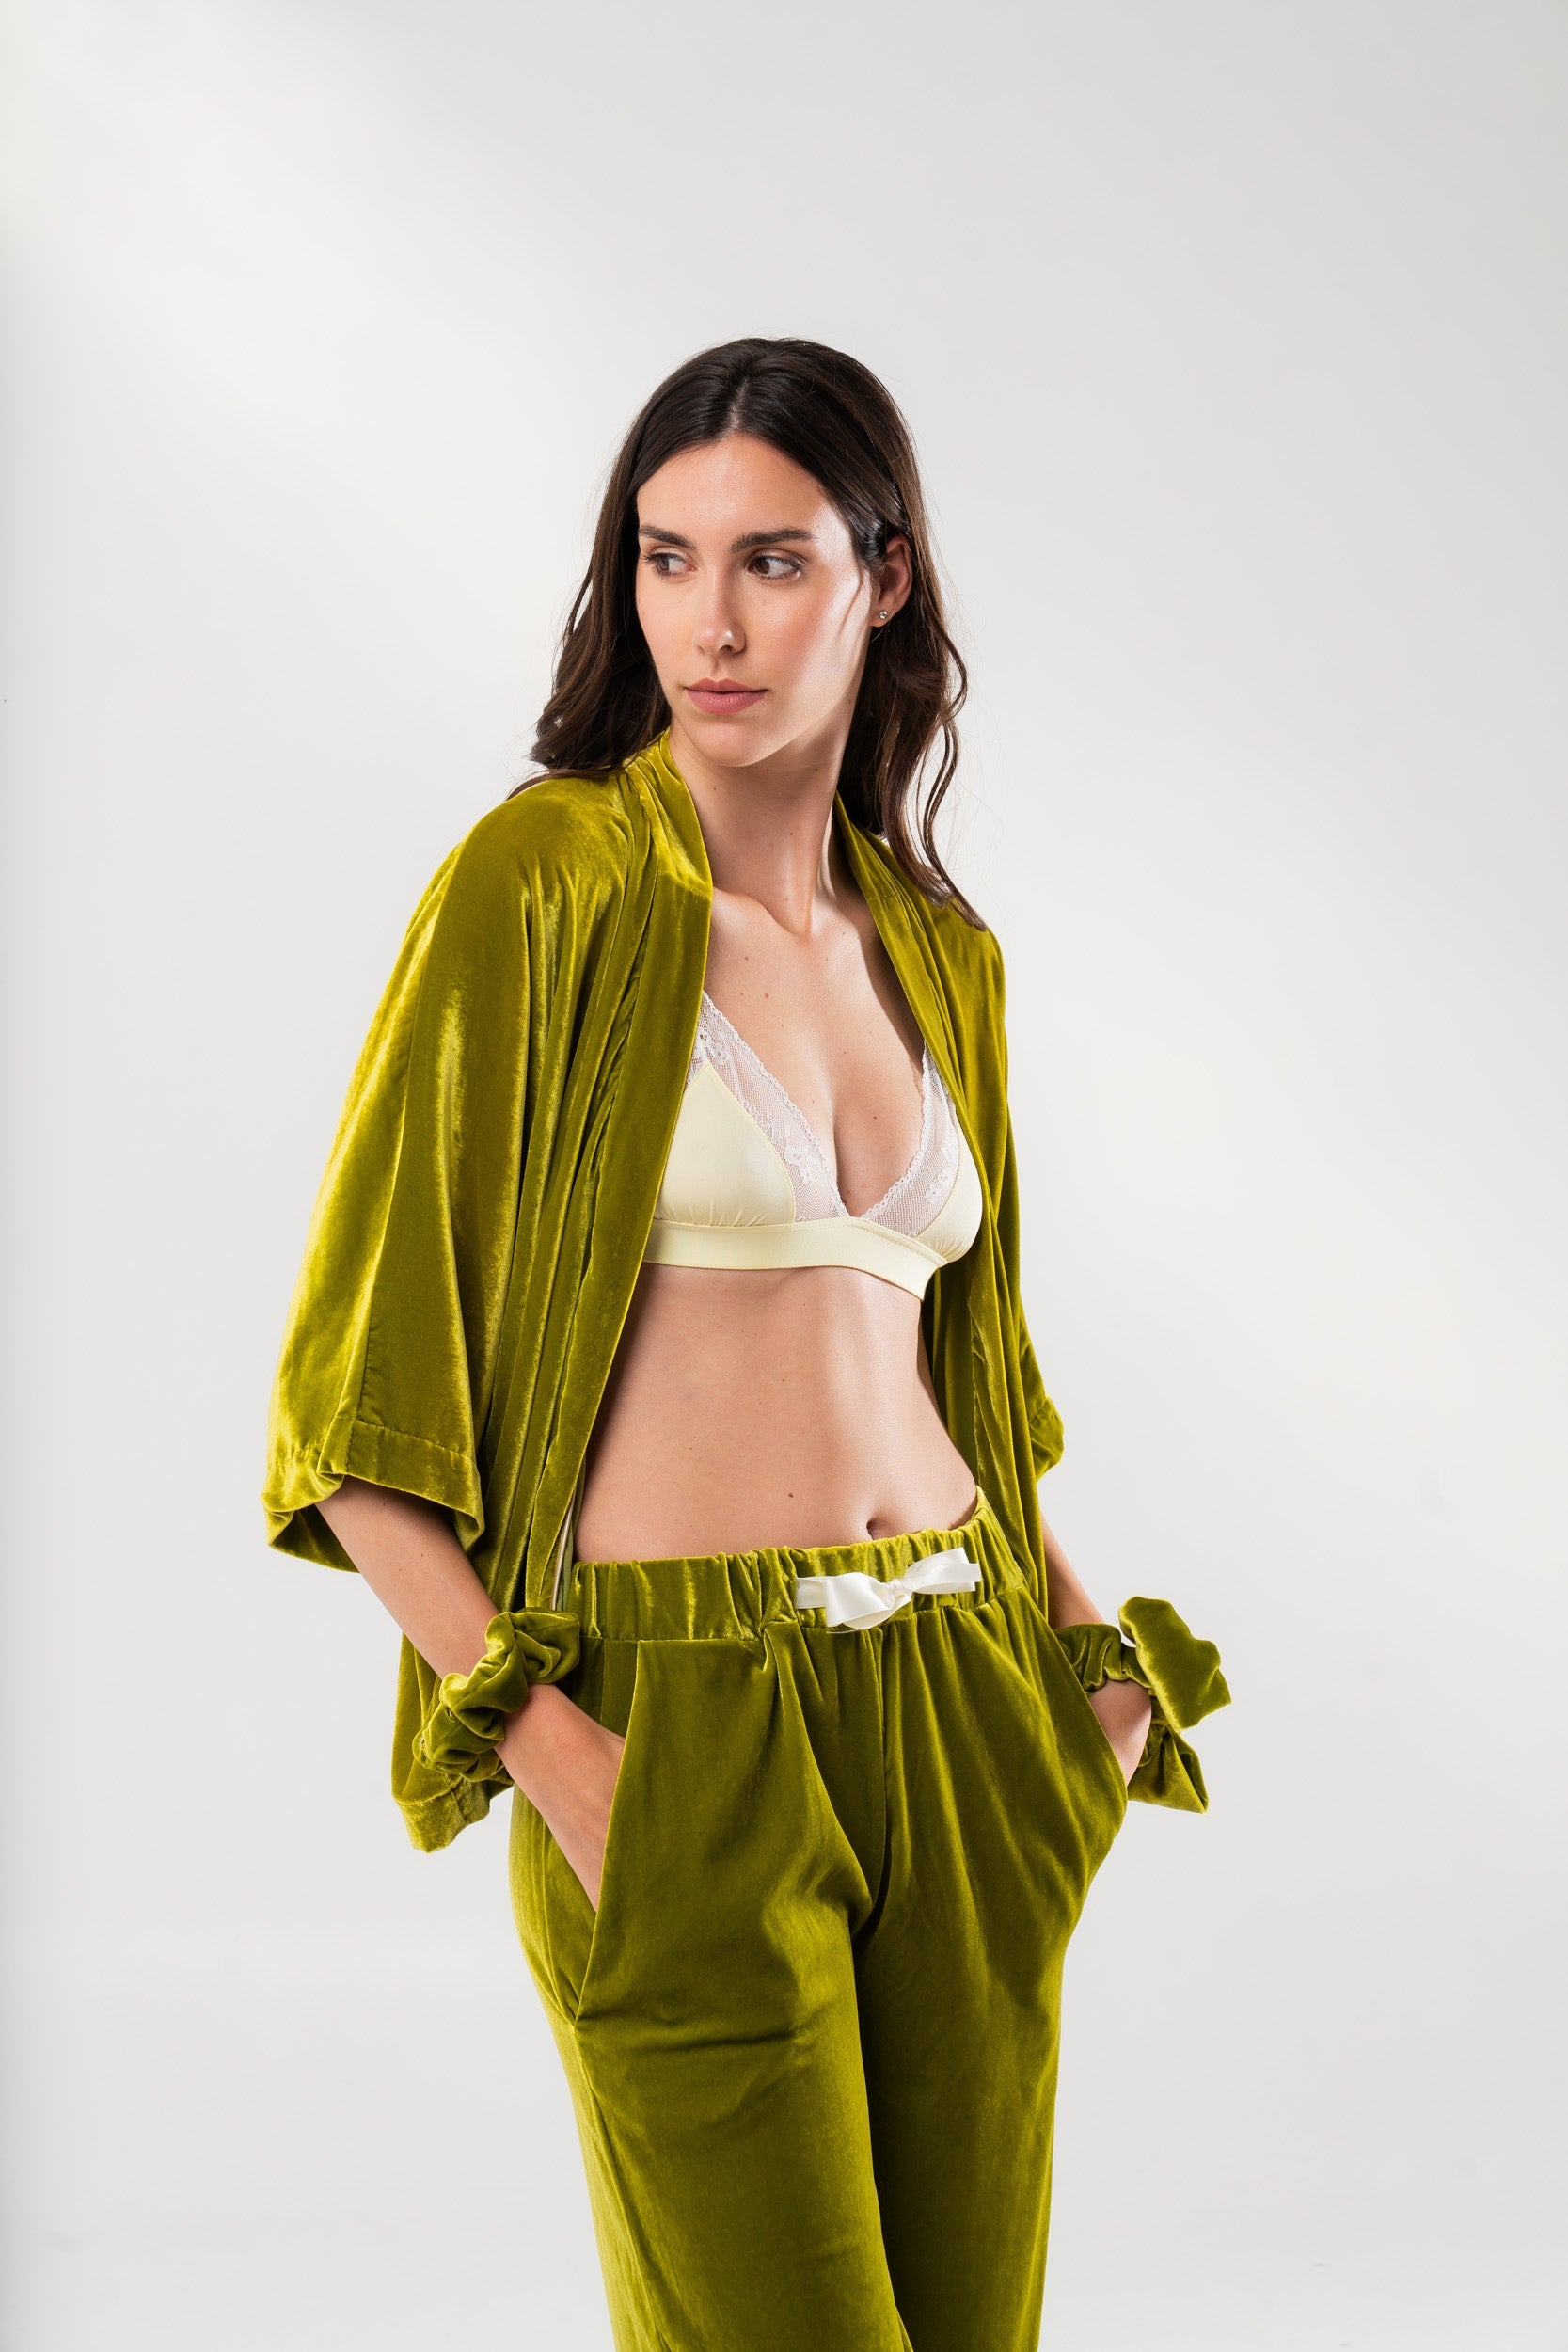 lingerie e loungewear di lusso versatile made in italy donne